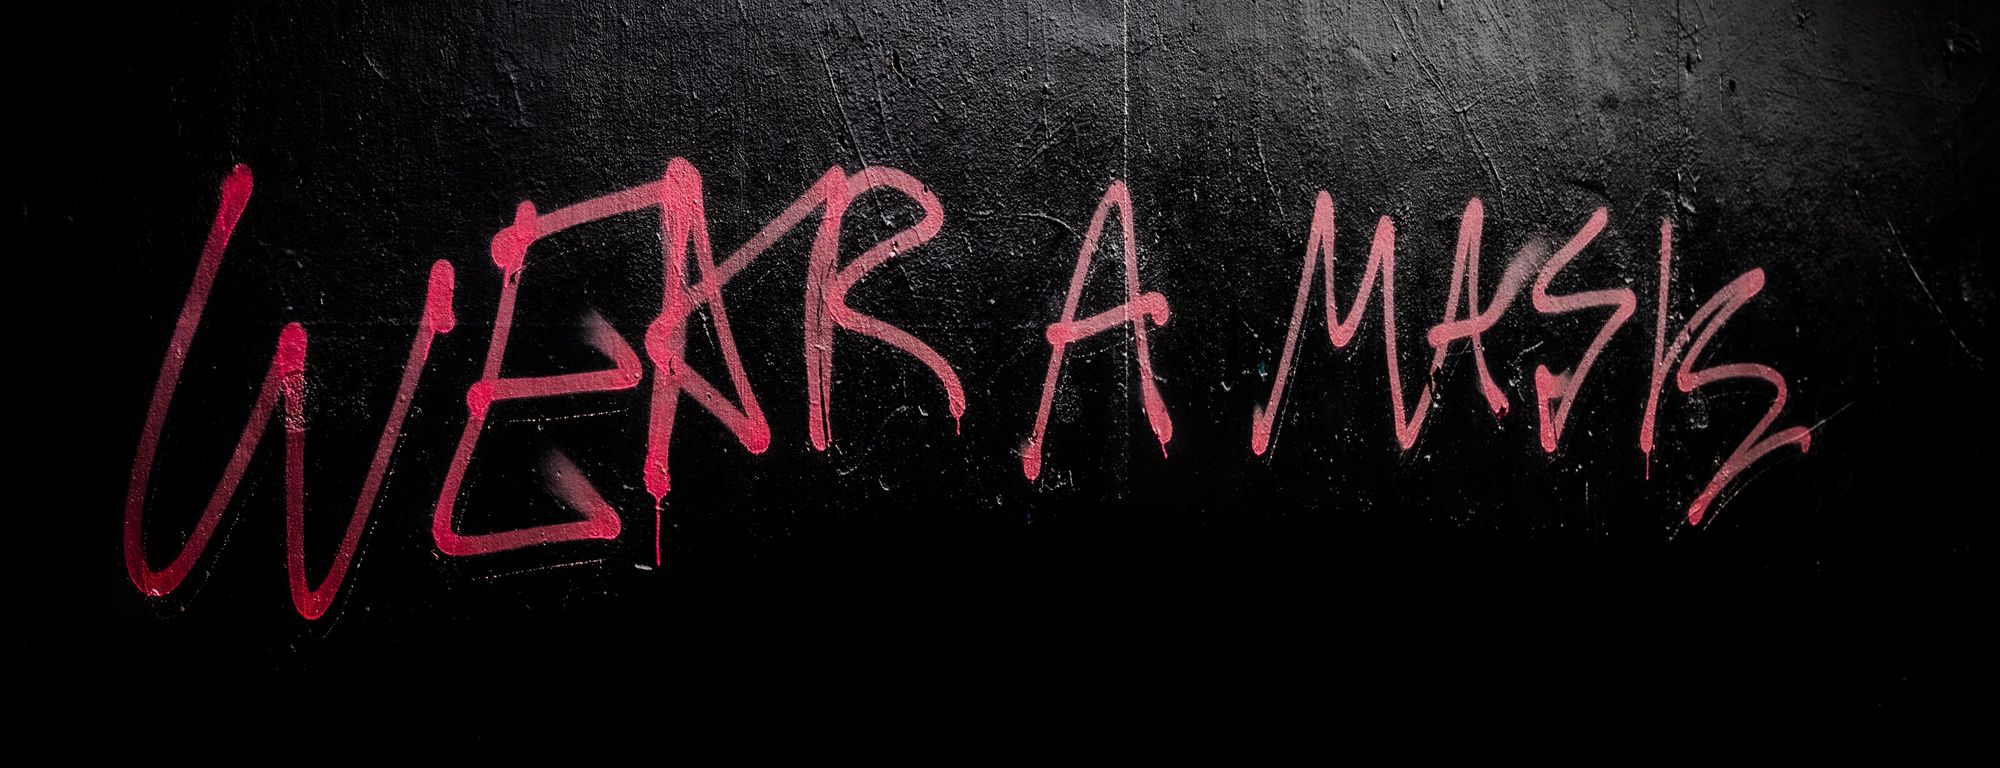 Graffiti that says "Wear a mask" in all caps and red spraypaint, on a black wall